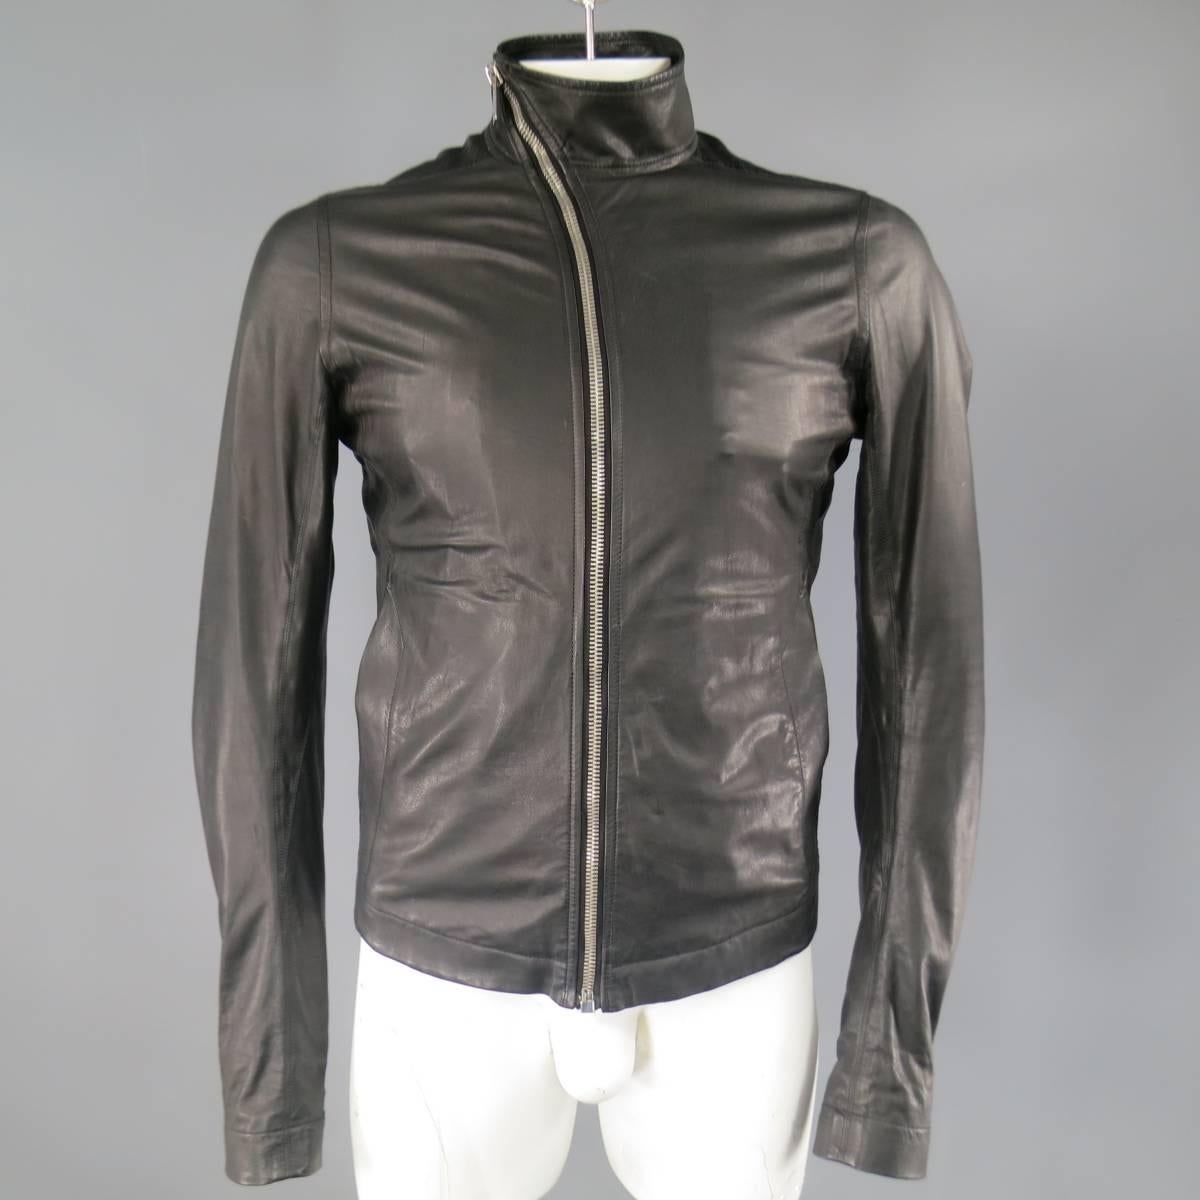 This classic RICK OWENS motorcycle jacket comes in an ultra soft, light weight black leather and features an asymmetrical slanted zip up front, high collar, tailored silhouette, double slit pockets, and zip cuff long sleeves. Made in Italy.
